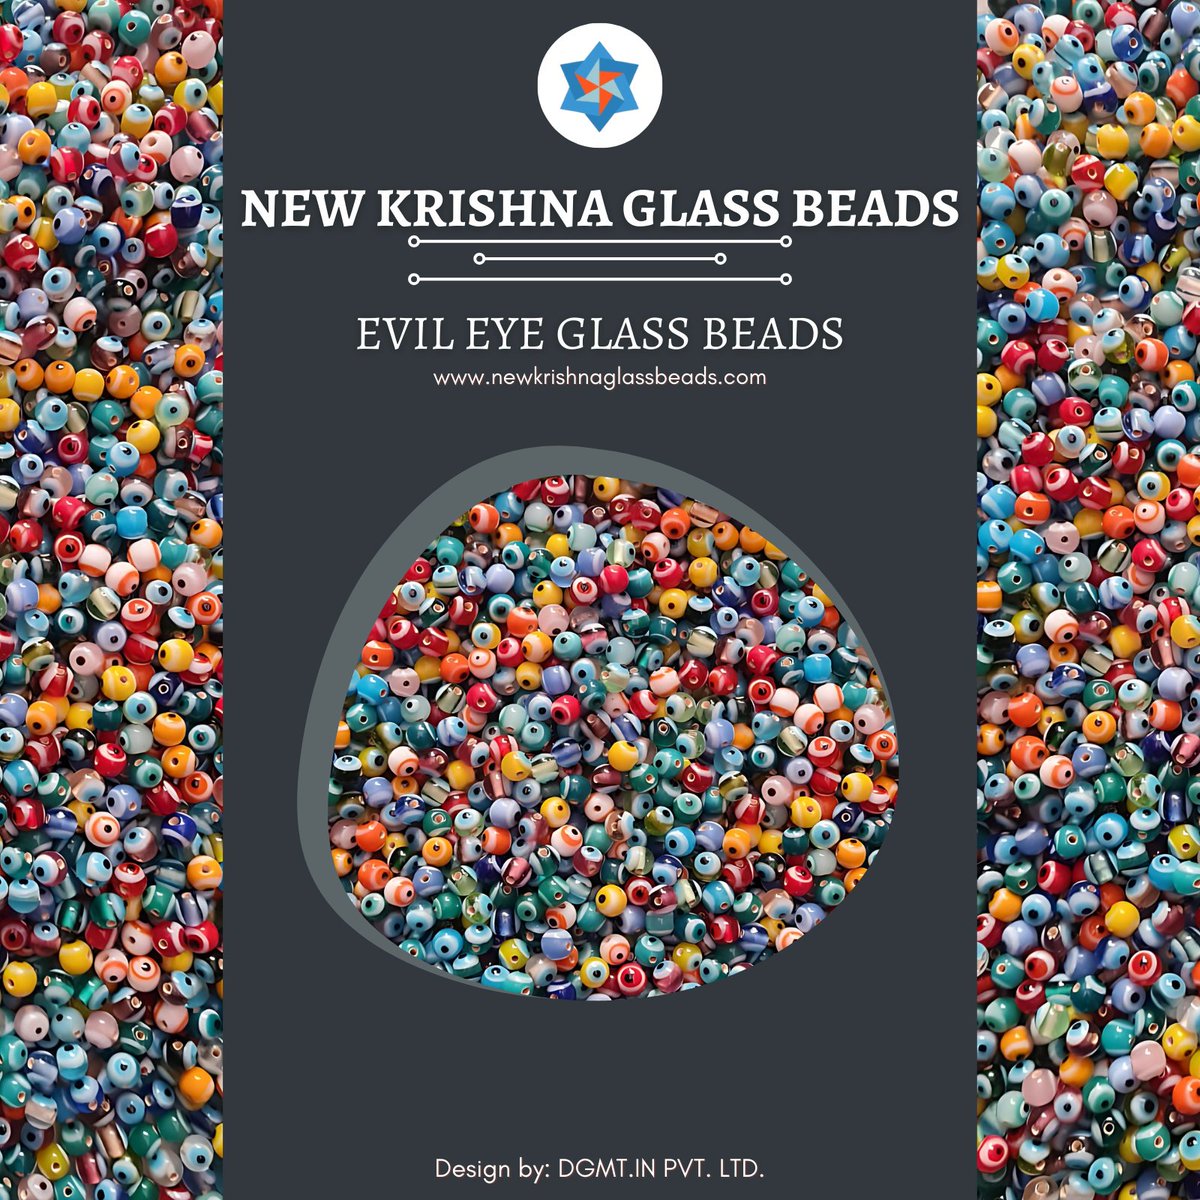 Seize the opportunity for your one-of-a-kind evil eye beads transaction! Contact us now to secure your exclusive offer. Act swiftly and claim it as your own!

#KrishnaGlassBeads #Craftsmanship #UniqueStyle #KrishnaGlassBeads #CraftedWithPrecision #GlassBeads #ArtisticPerfection